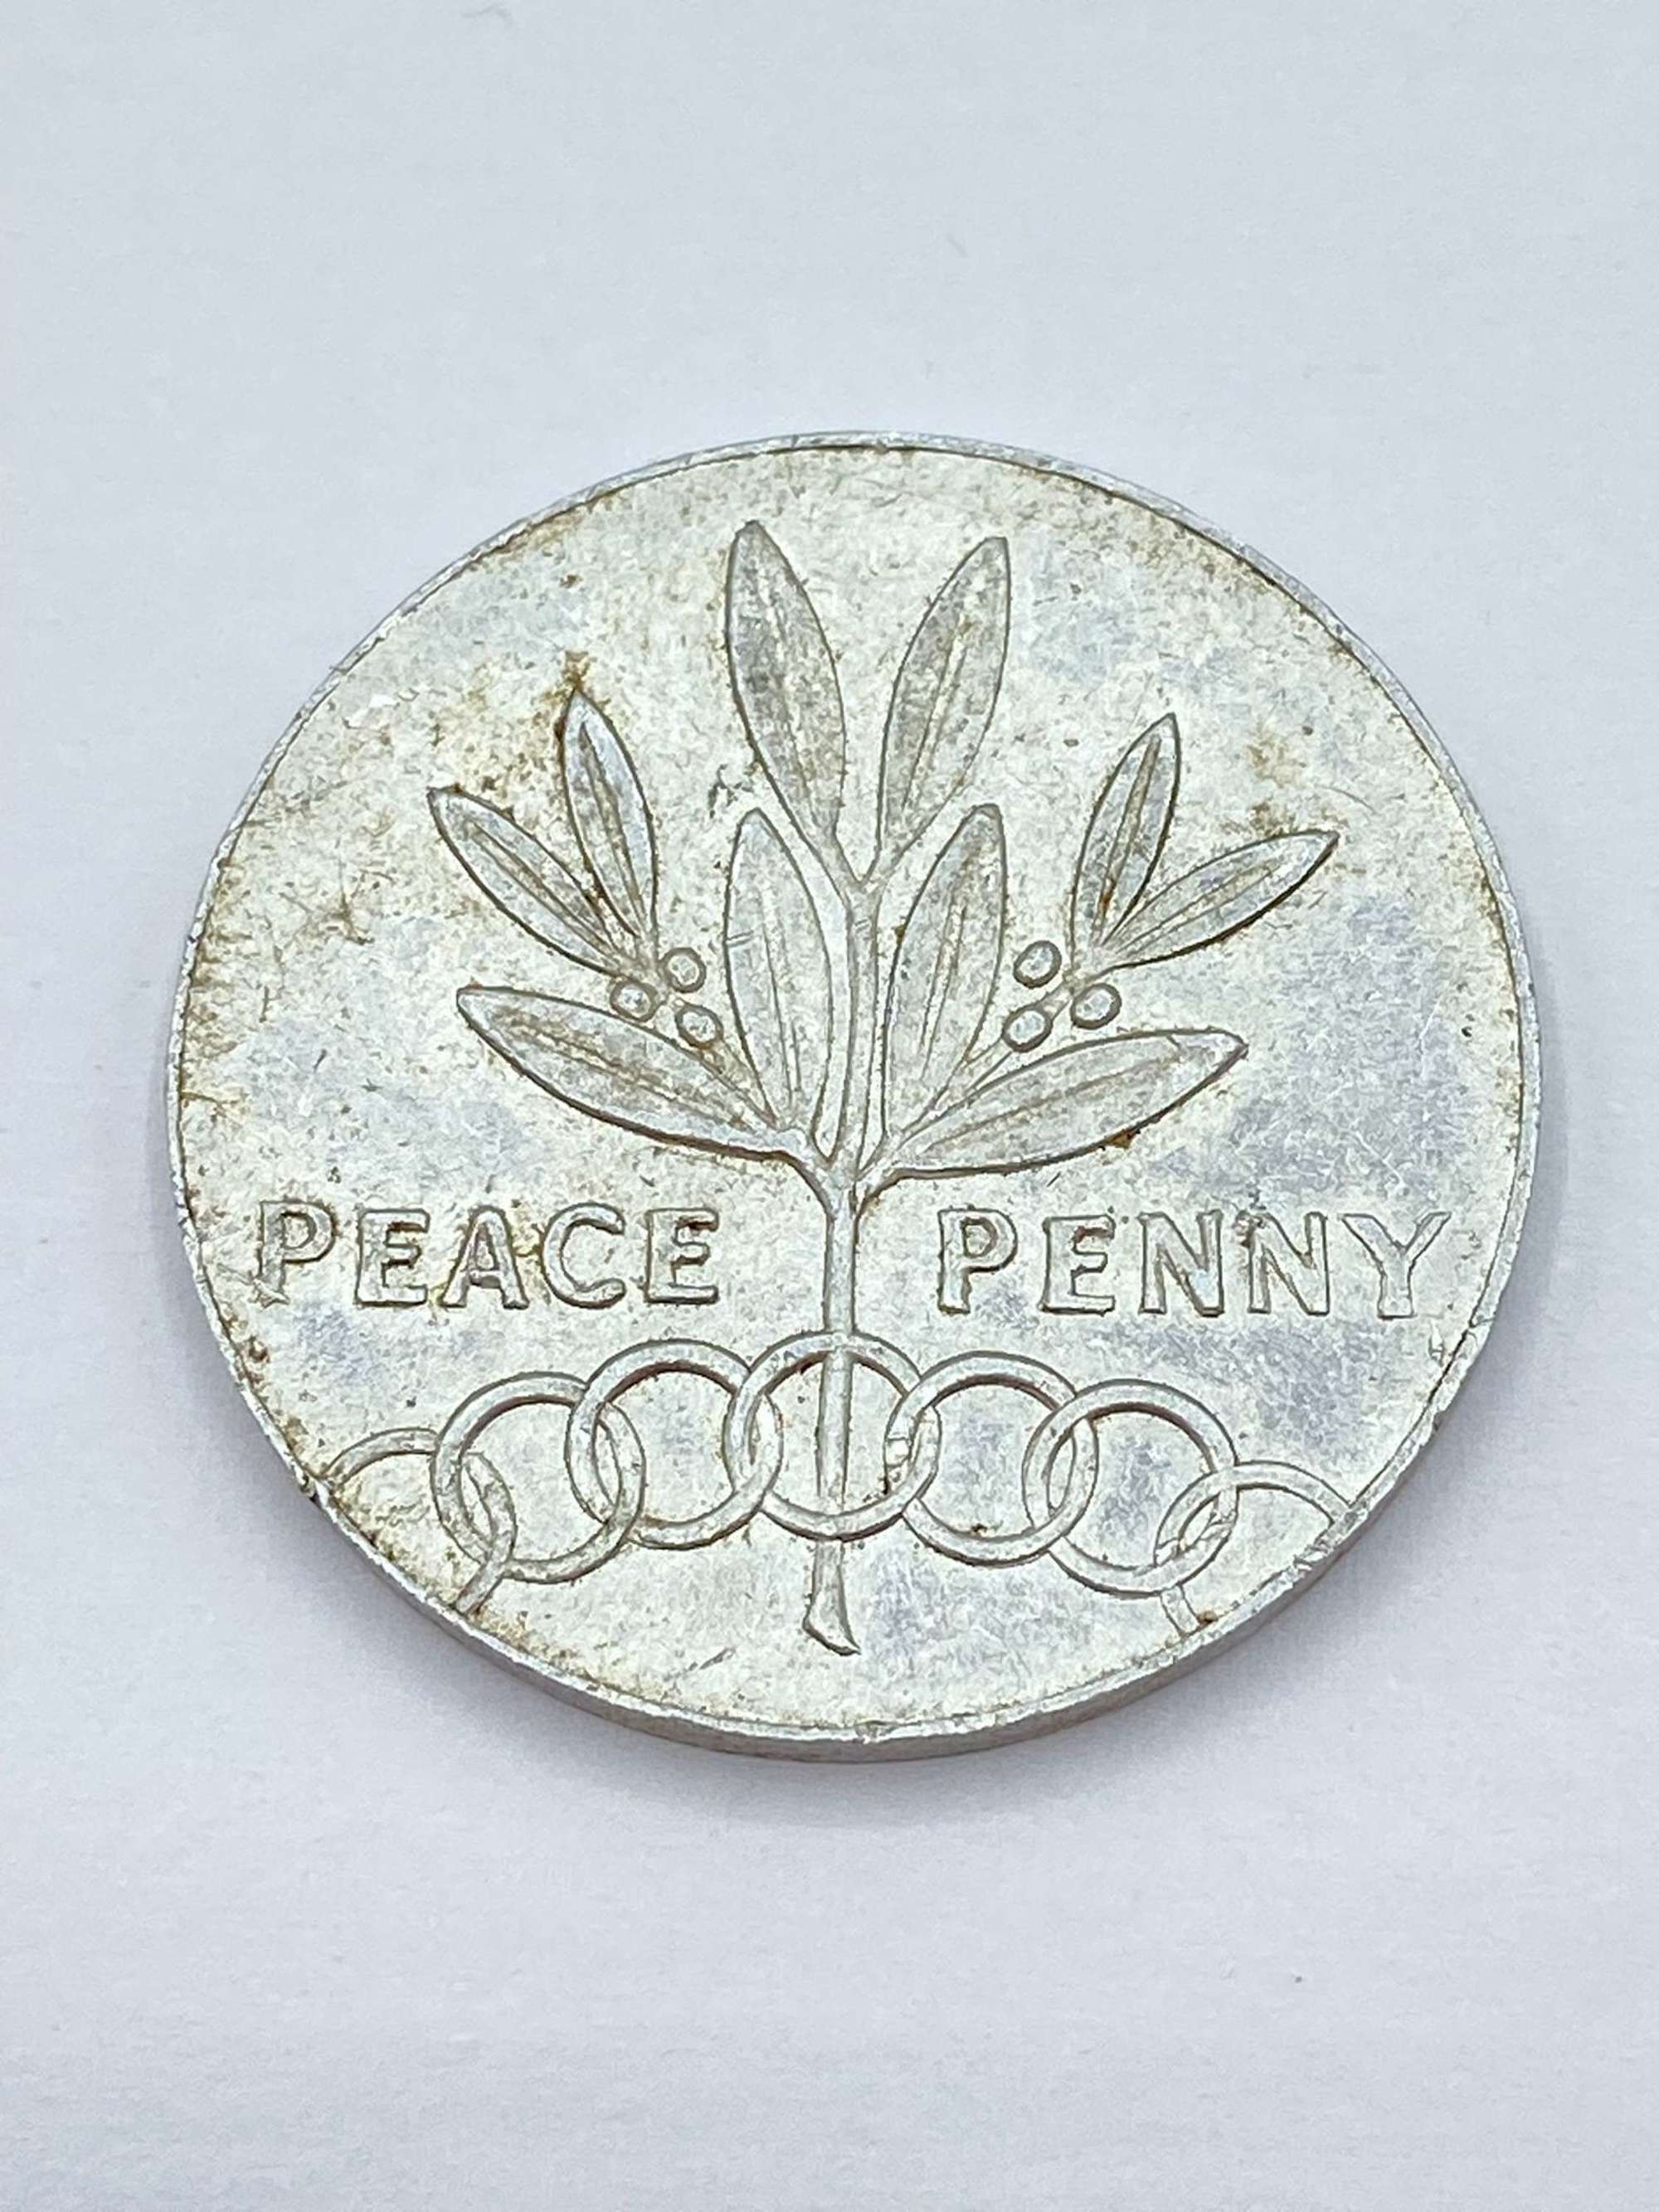 WW2 British Peace Penny, For Peace Defence & Justice Victory Token